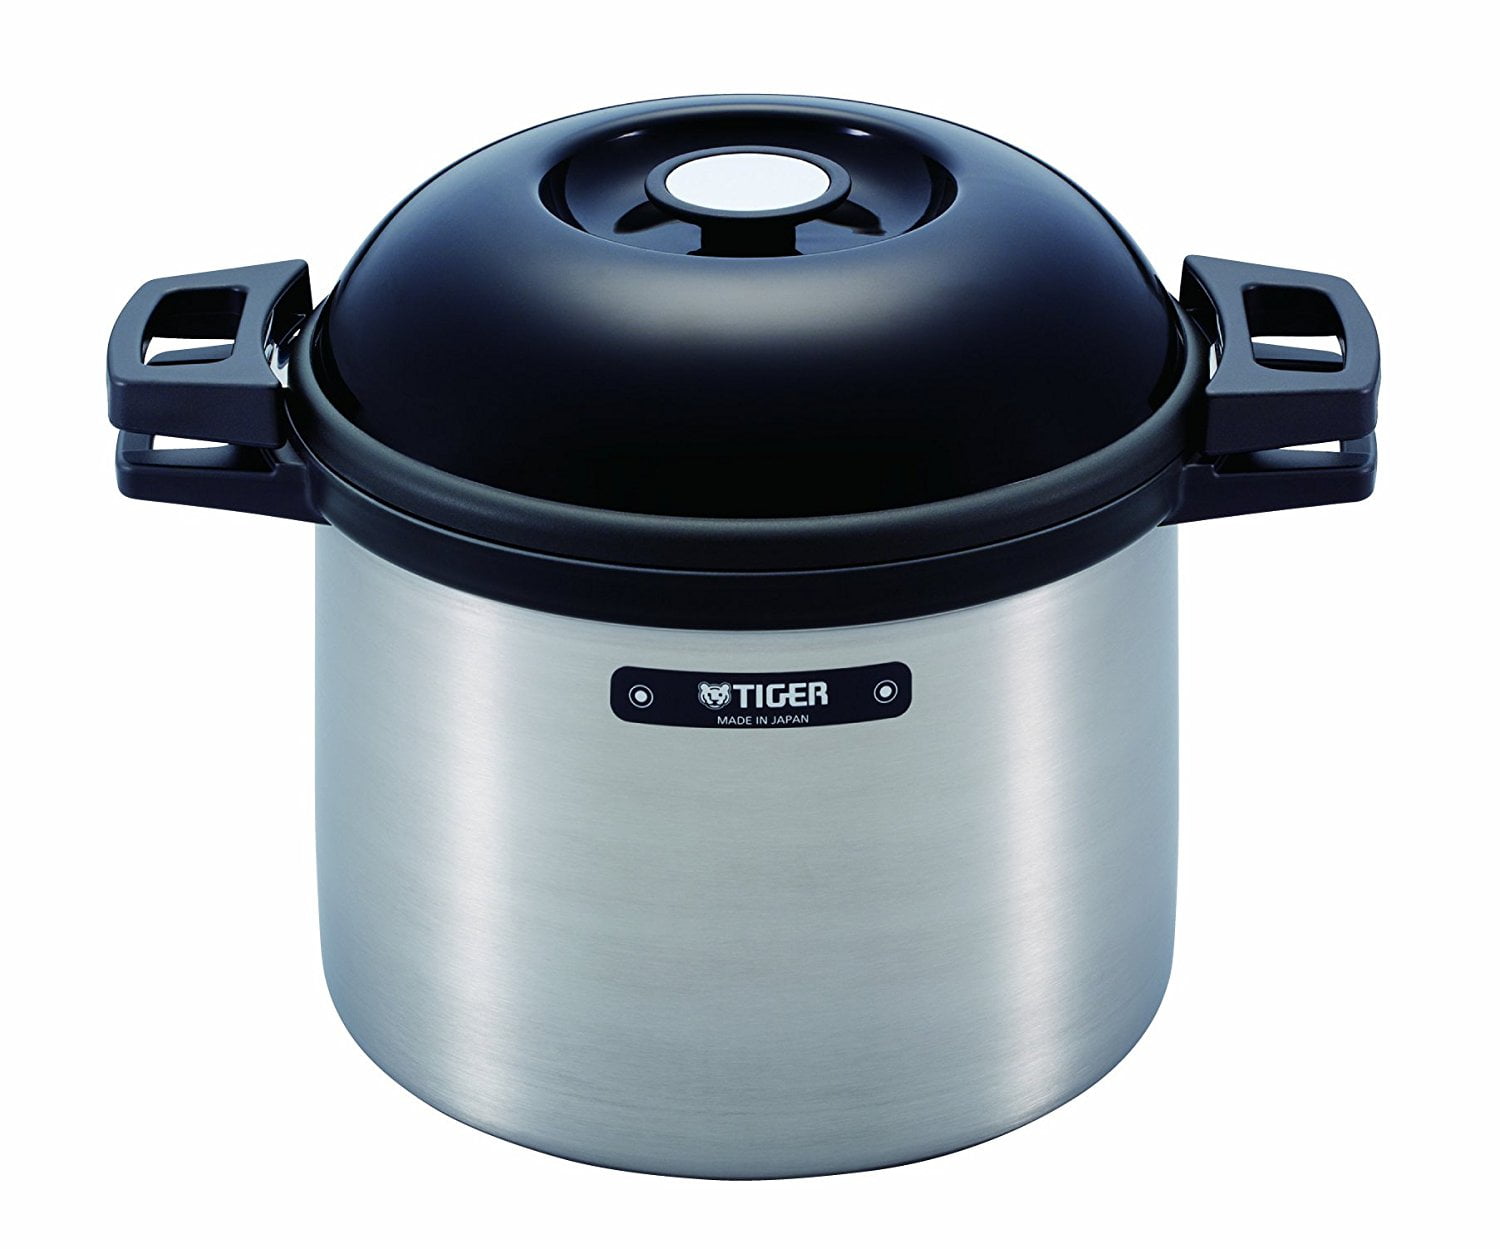 TIGER NFH-G450 Non-Electric Thermal Slow Cooker 4.75qts / 4.5L, Silver